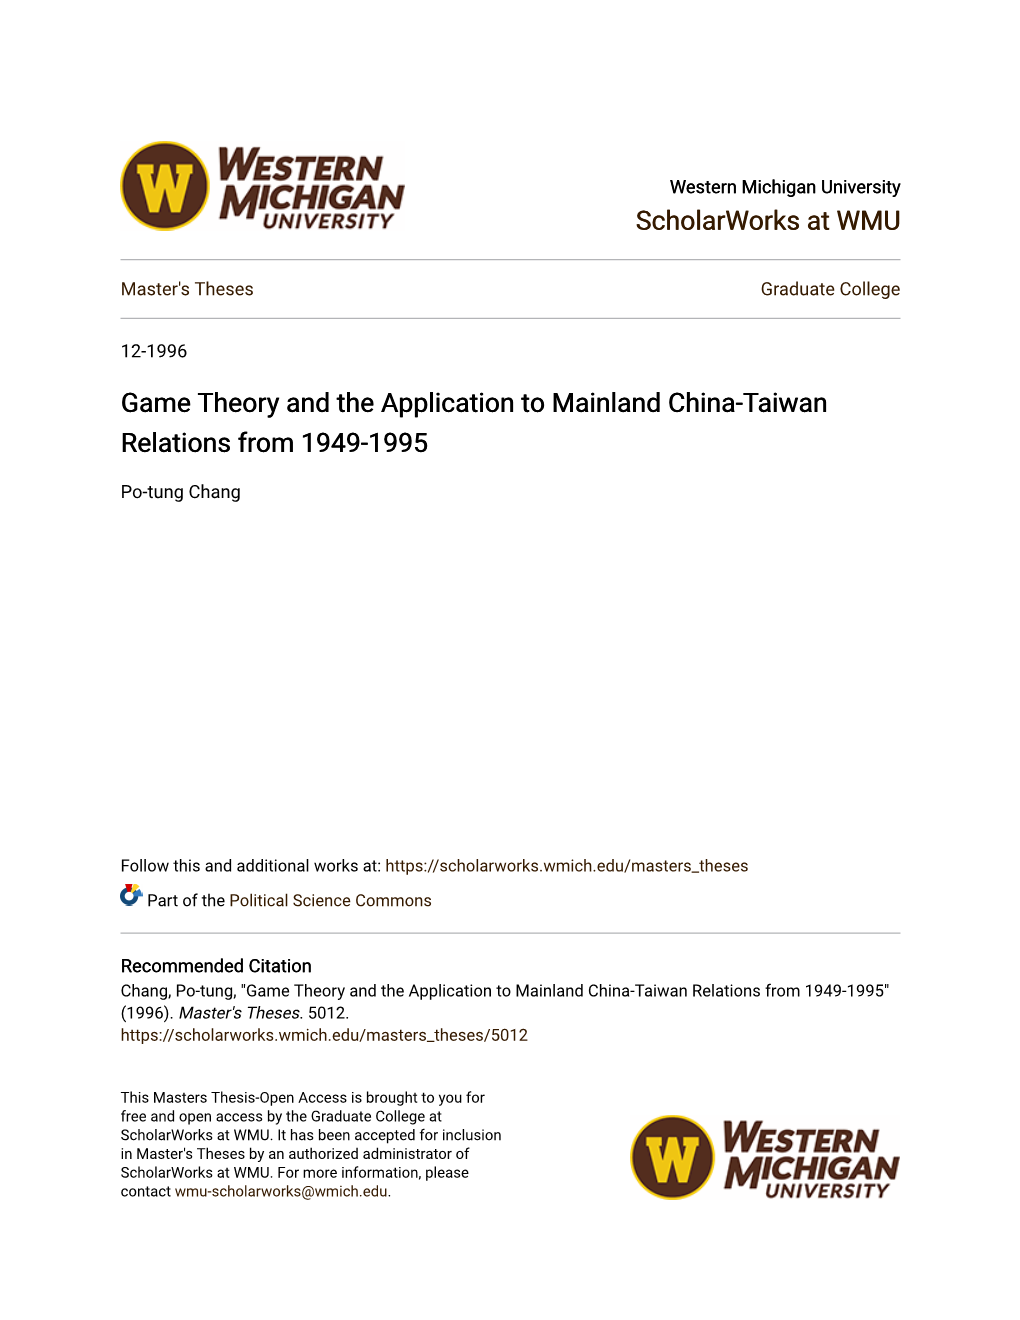 Game Theory and the Application to Mainland China-Taiwan Relations from 1949-1995